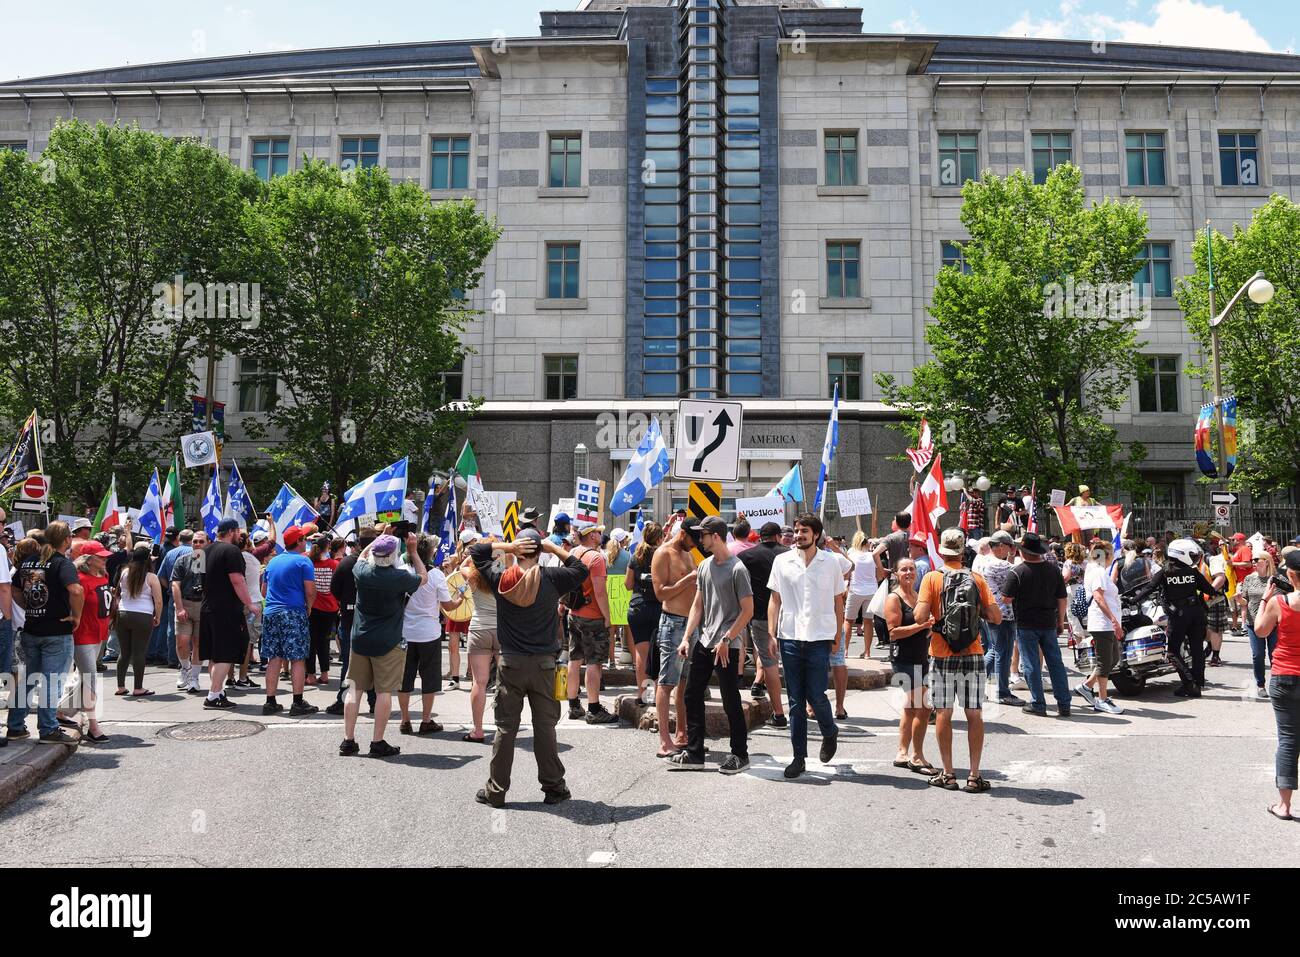 Ottawa, Canada - July 1, 2020: Protesters and counter protesters gather in front of the US Embassy. The annual Canada Day festivities were cancelled due to the Covid-19 pandemic. Stock Photo